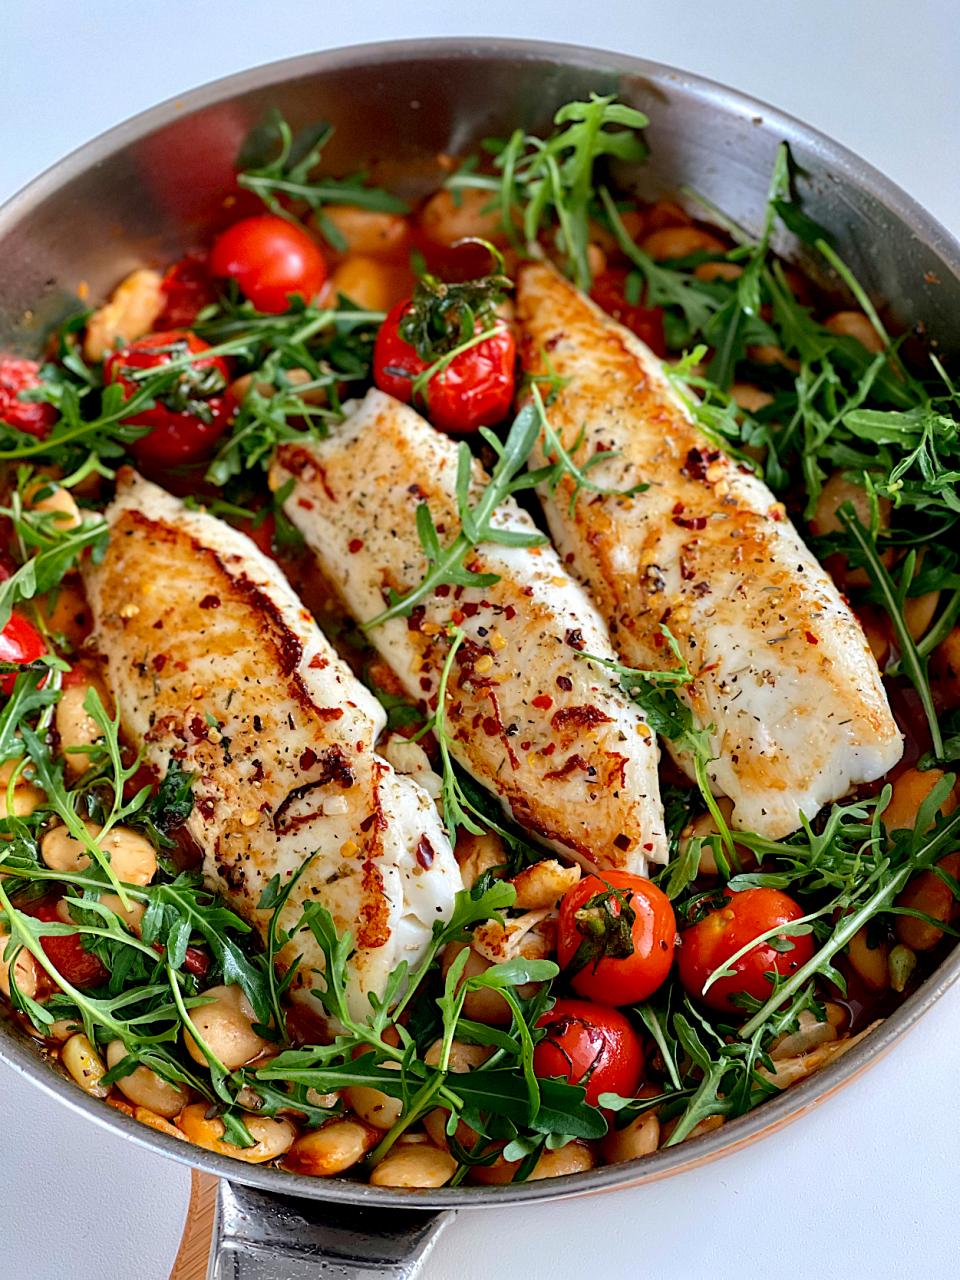 Pan fried fish, butter beans, tomatoes and wilted arugula